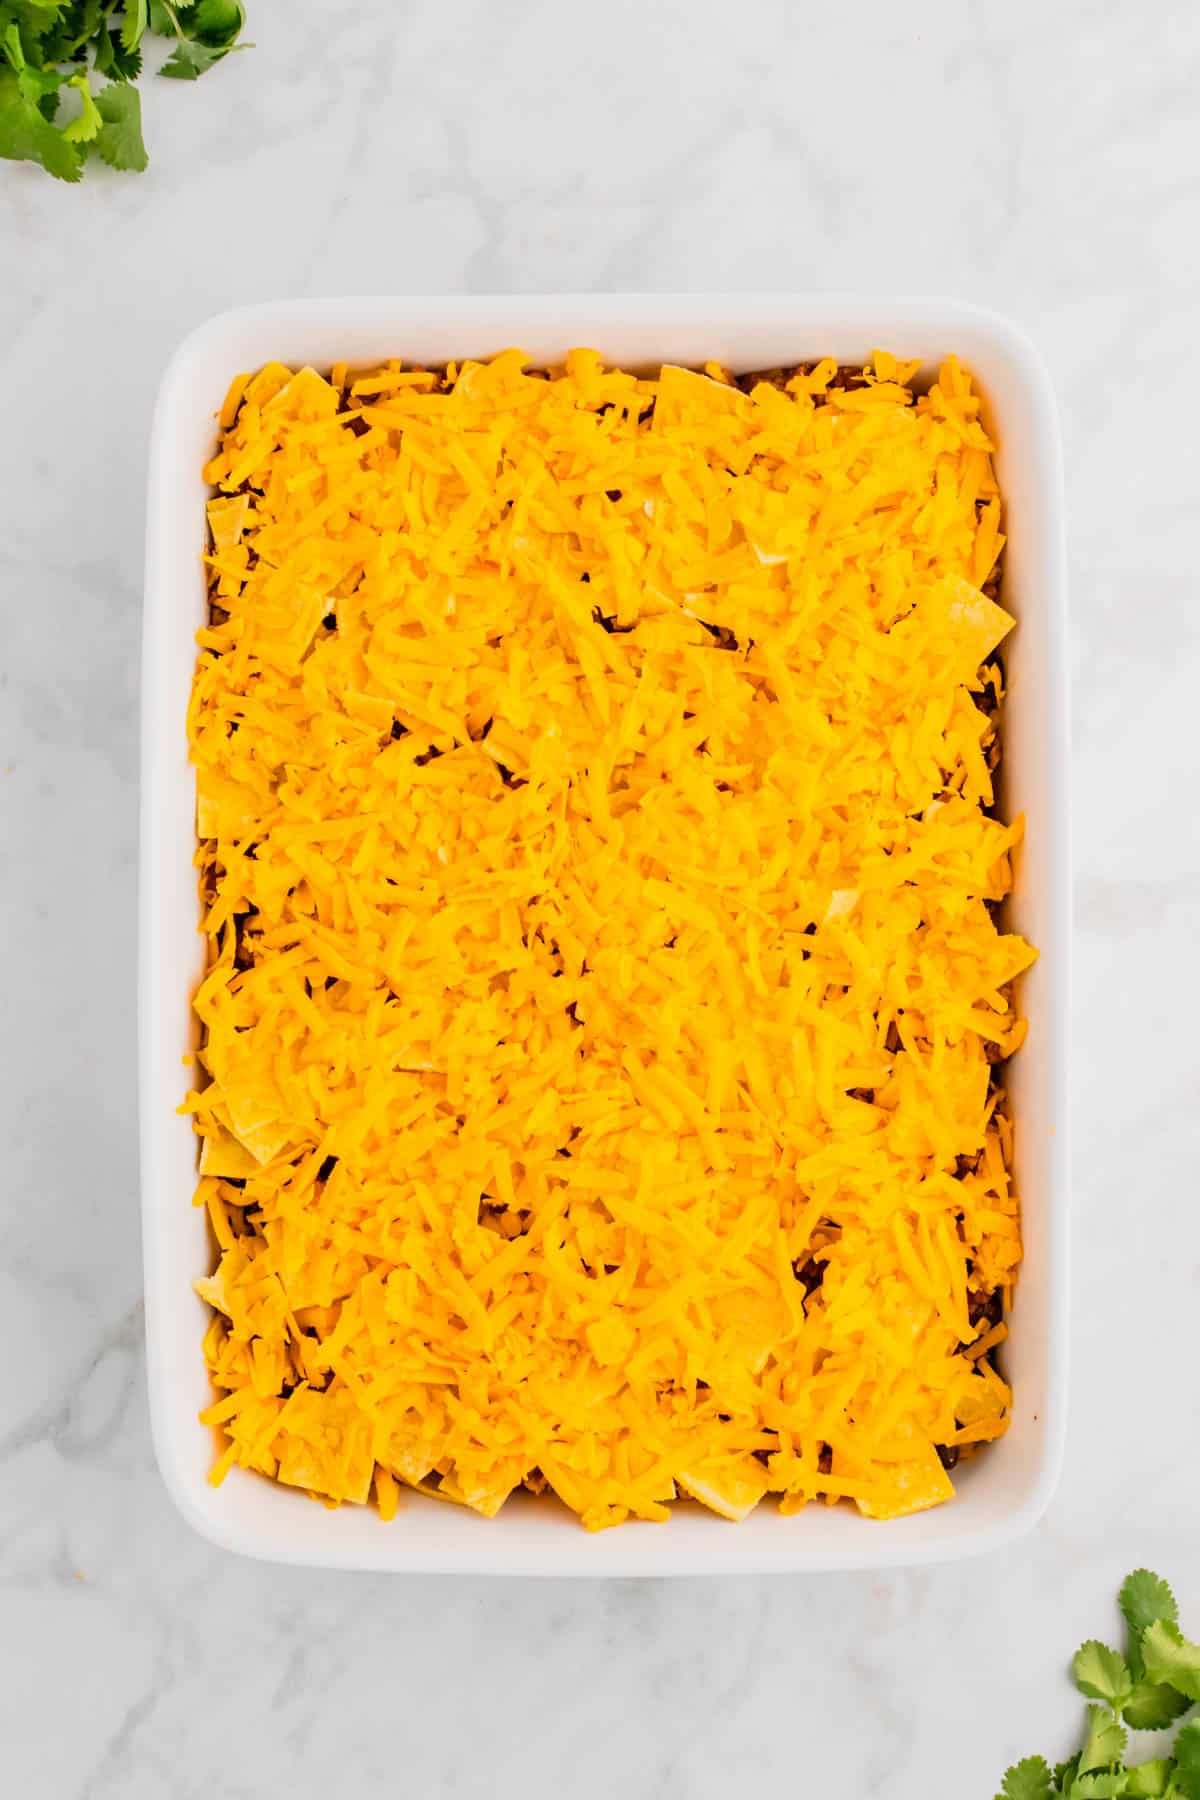 shredded cheddar and corn tortilla pieces on top of beef enchilada casserole in a baking dish